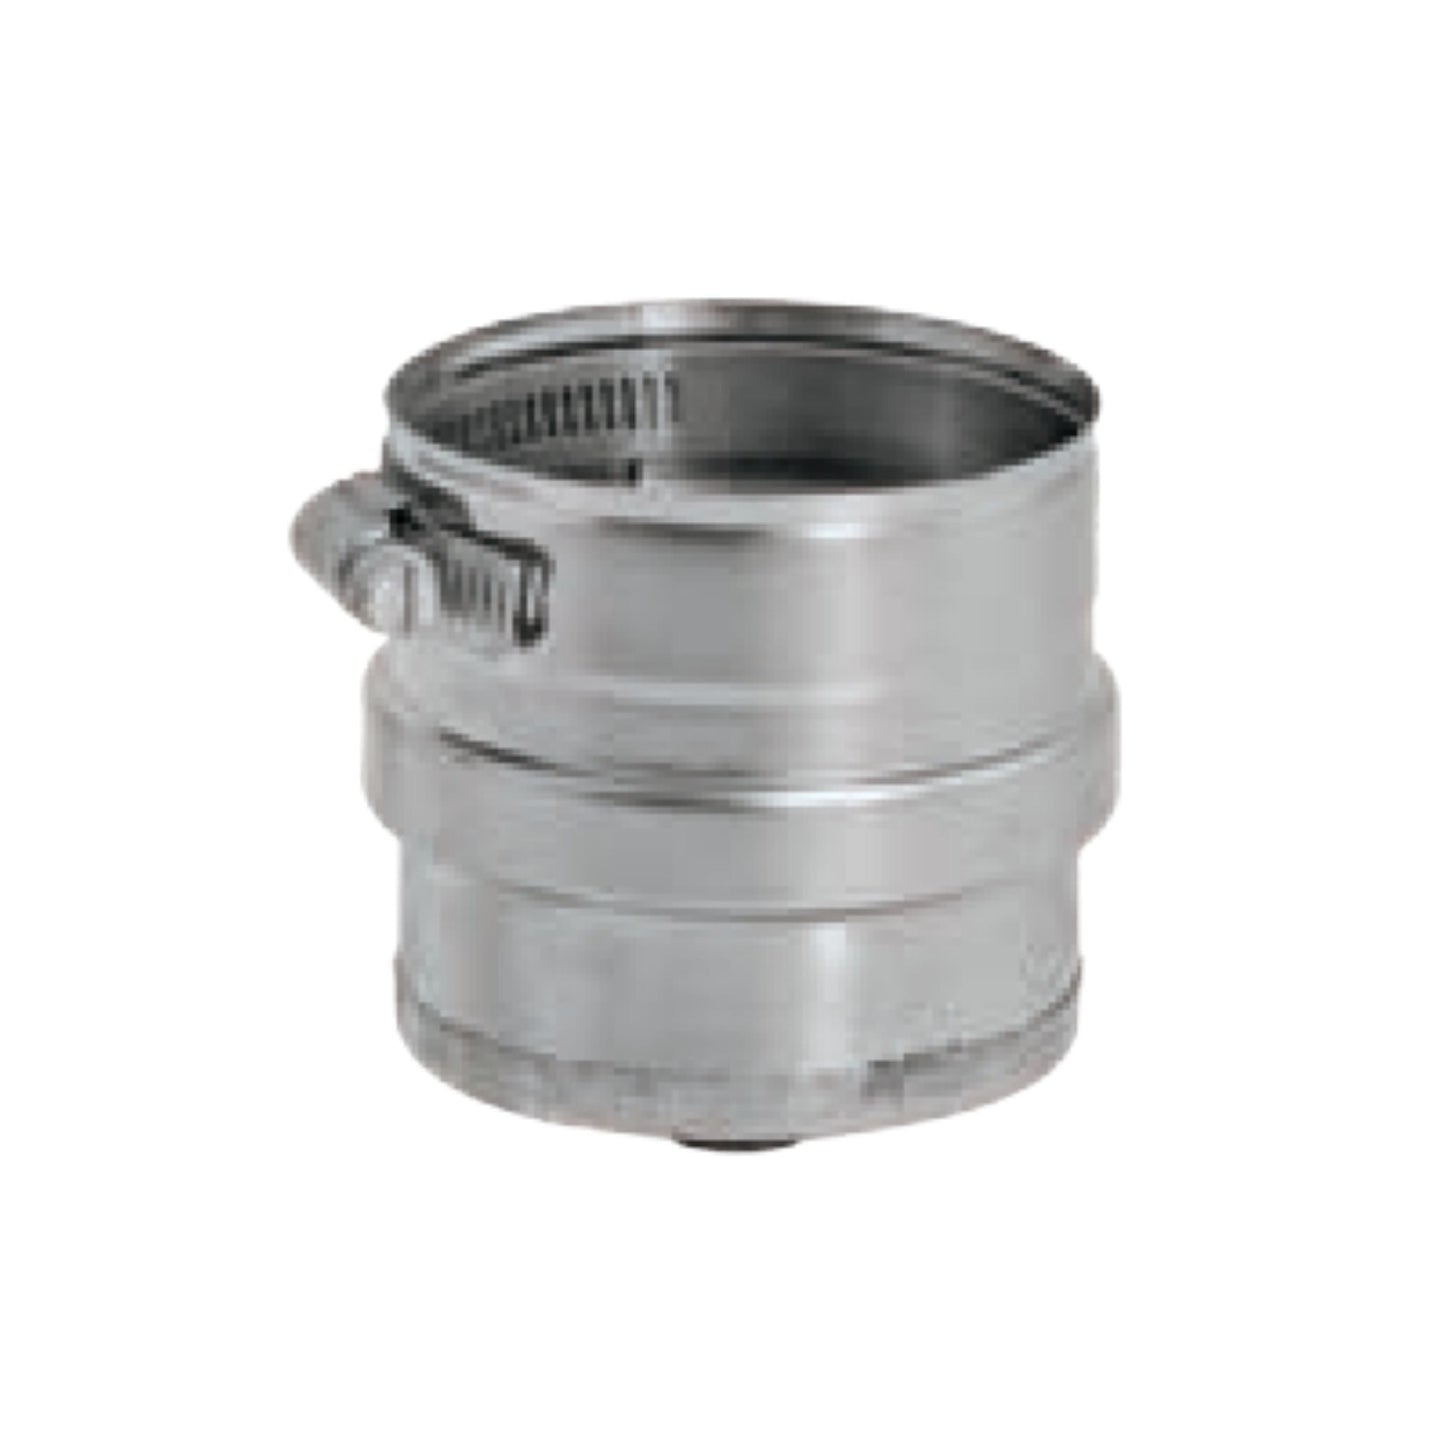 DuraVent FasNSeal 5" 29-4C Stainless Steel Drain Fitting